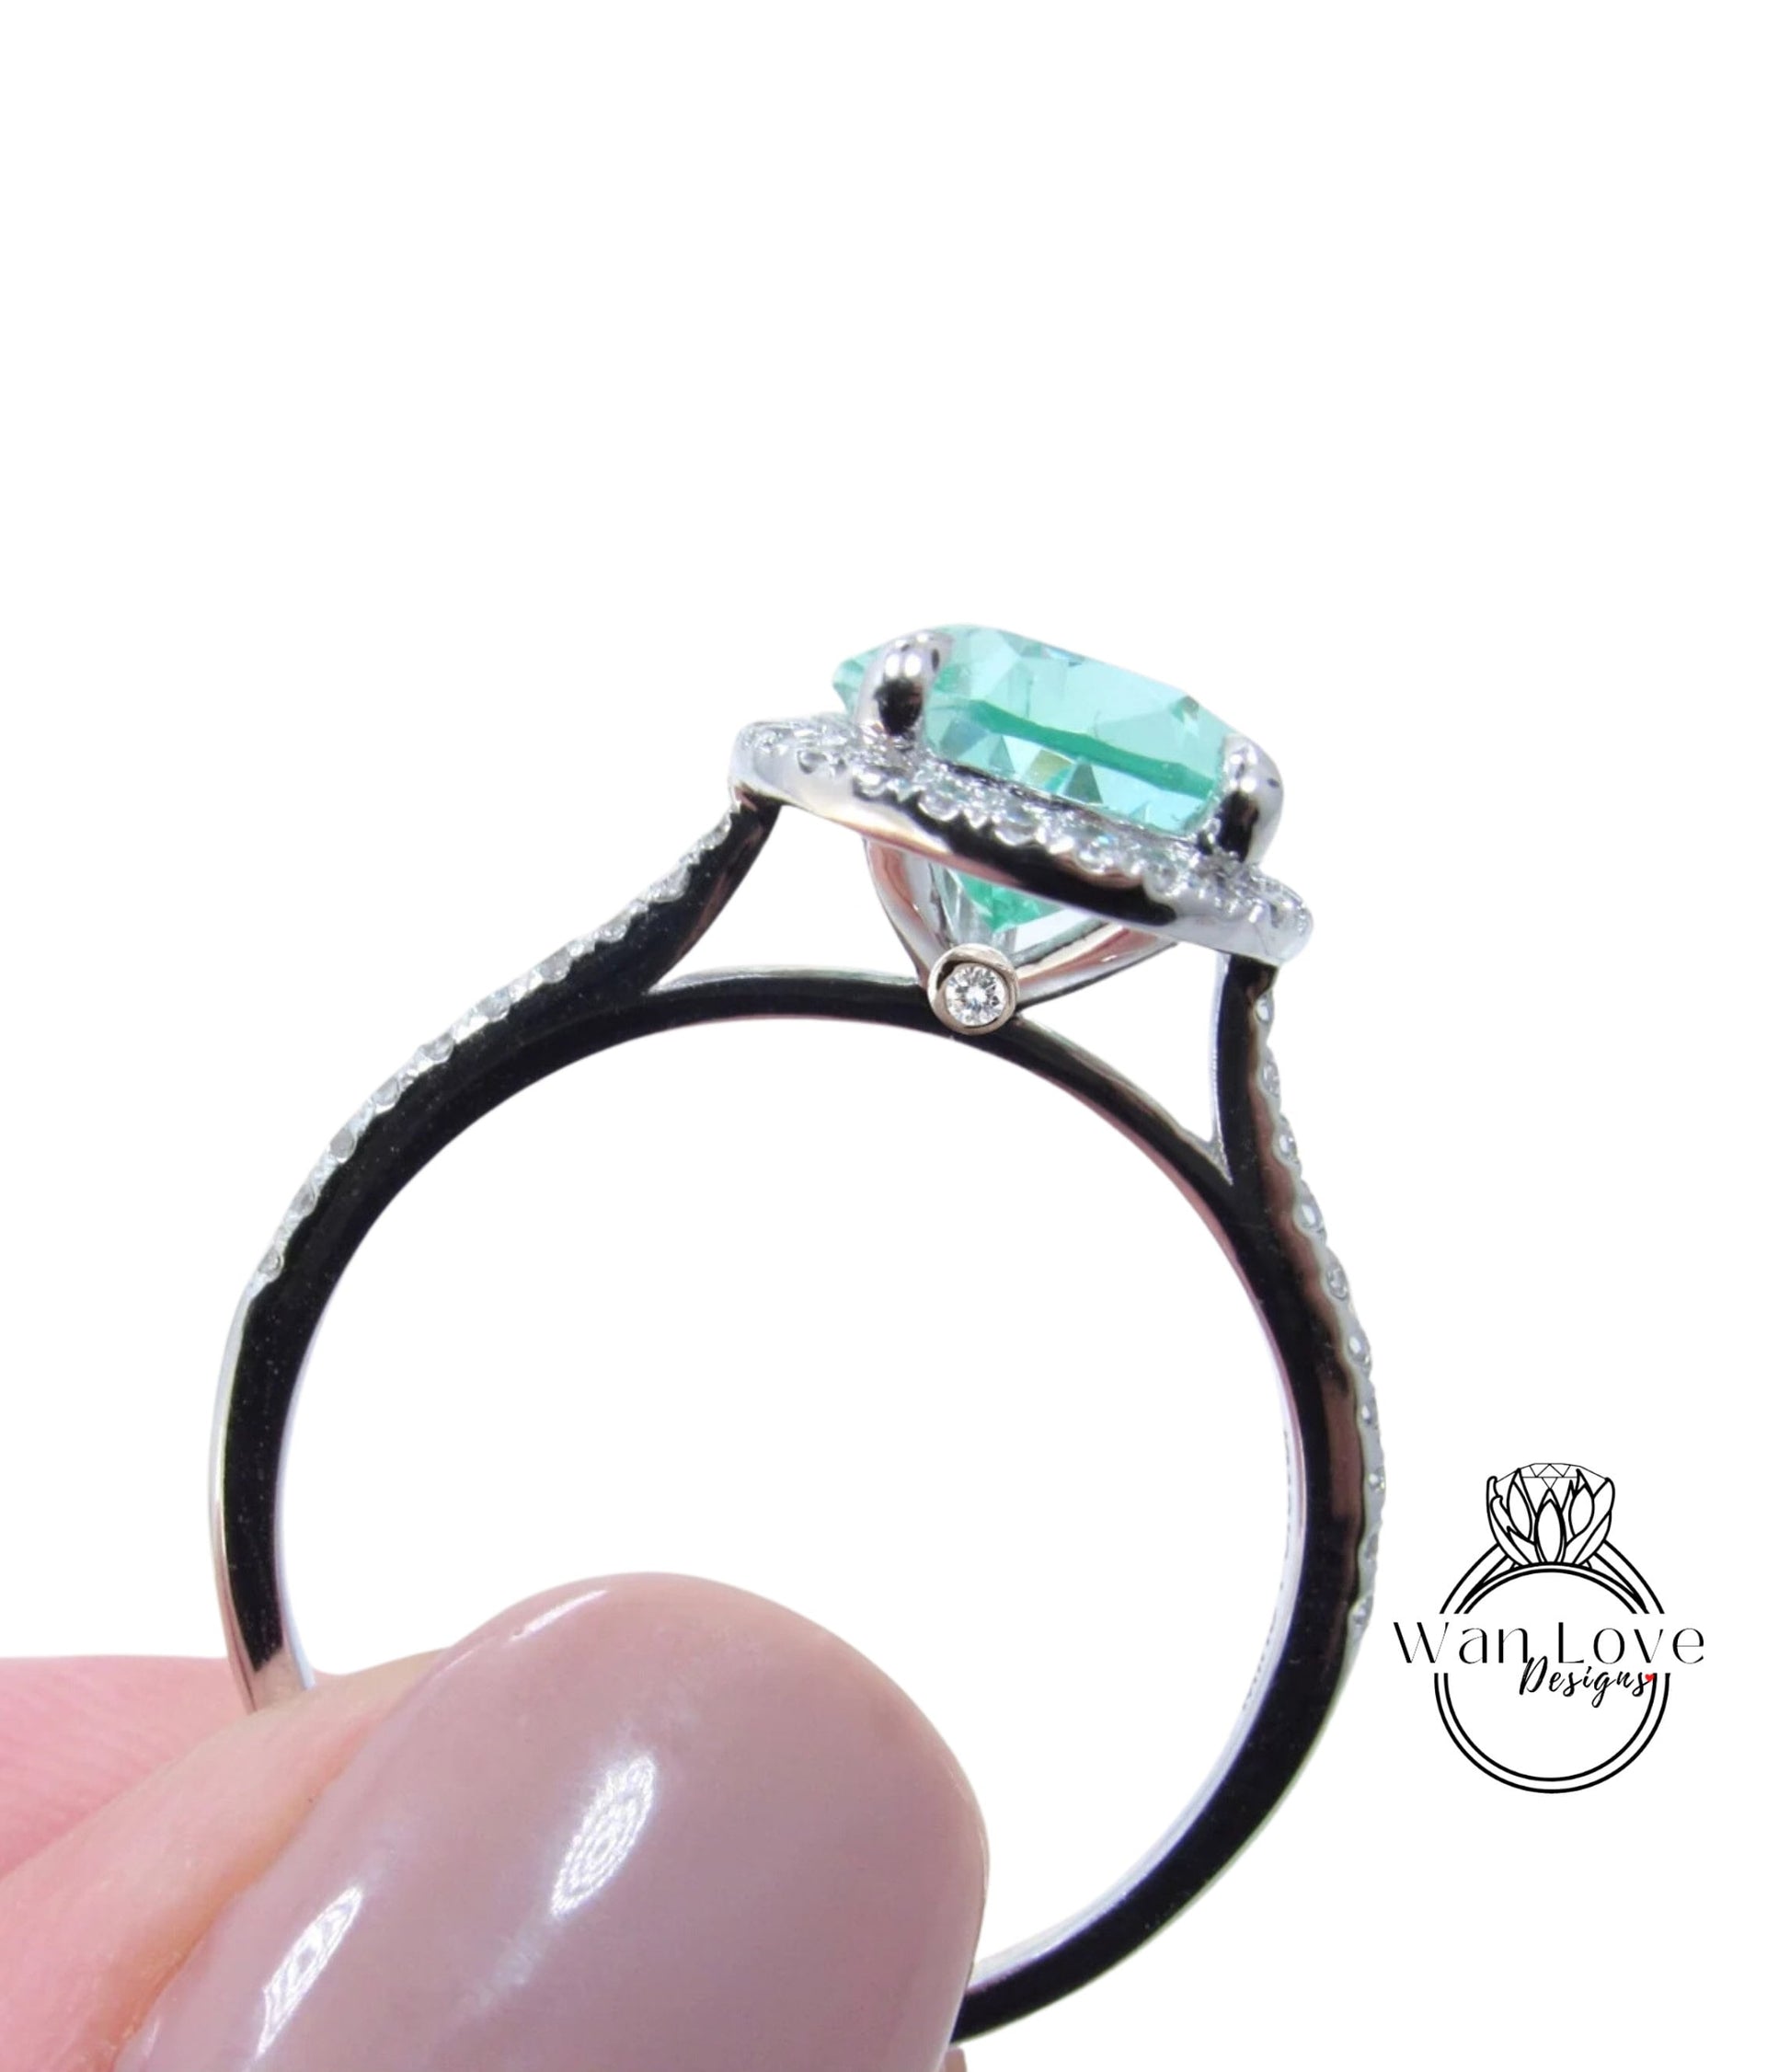 Add a Custom Secret Birthstone Special Gem or multiple gems to Personalize your Ring Diamond Sapphire Emerald Ruby~Ask for a Custom Listing Wan Love Designs